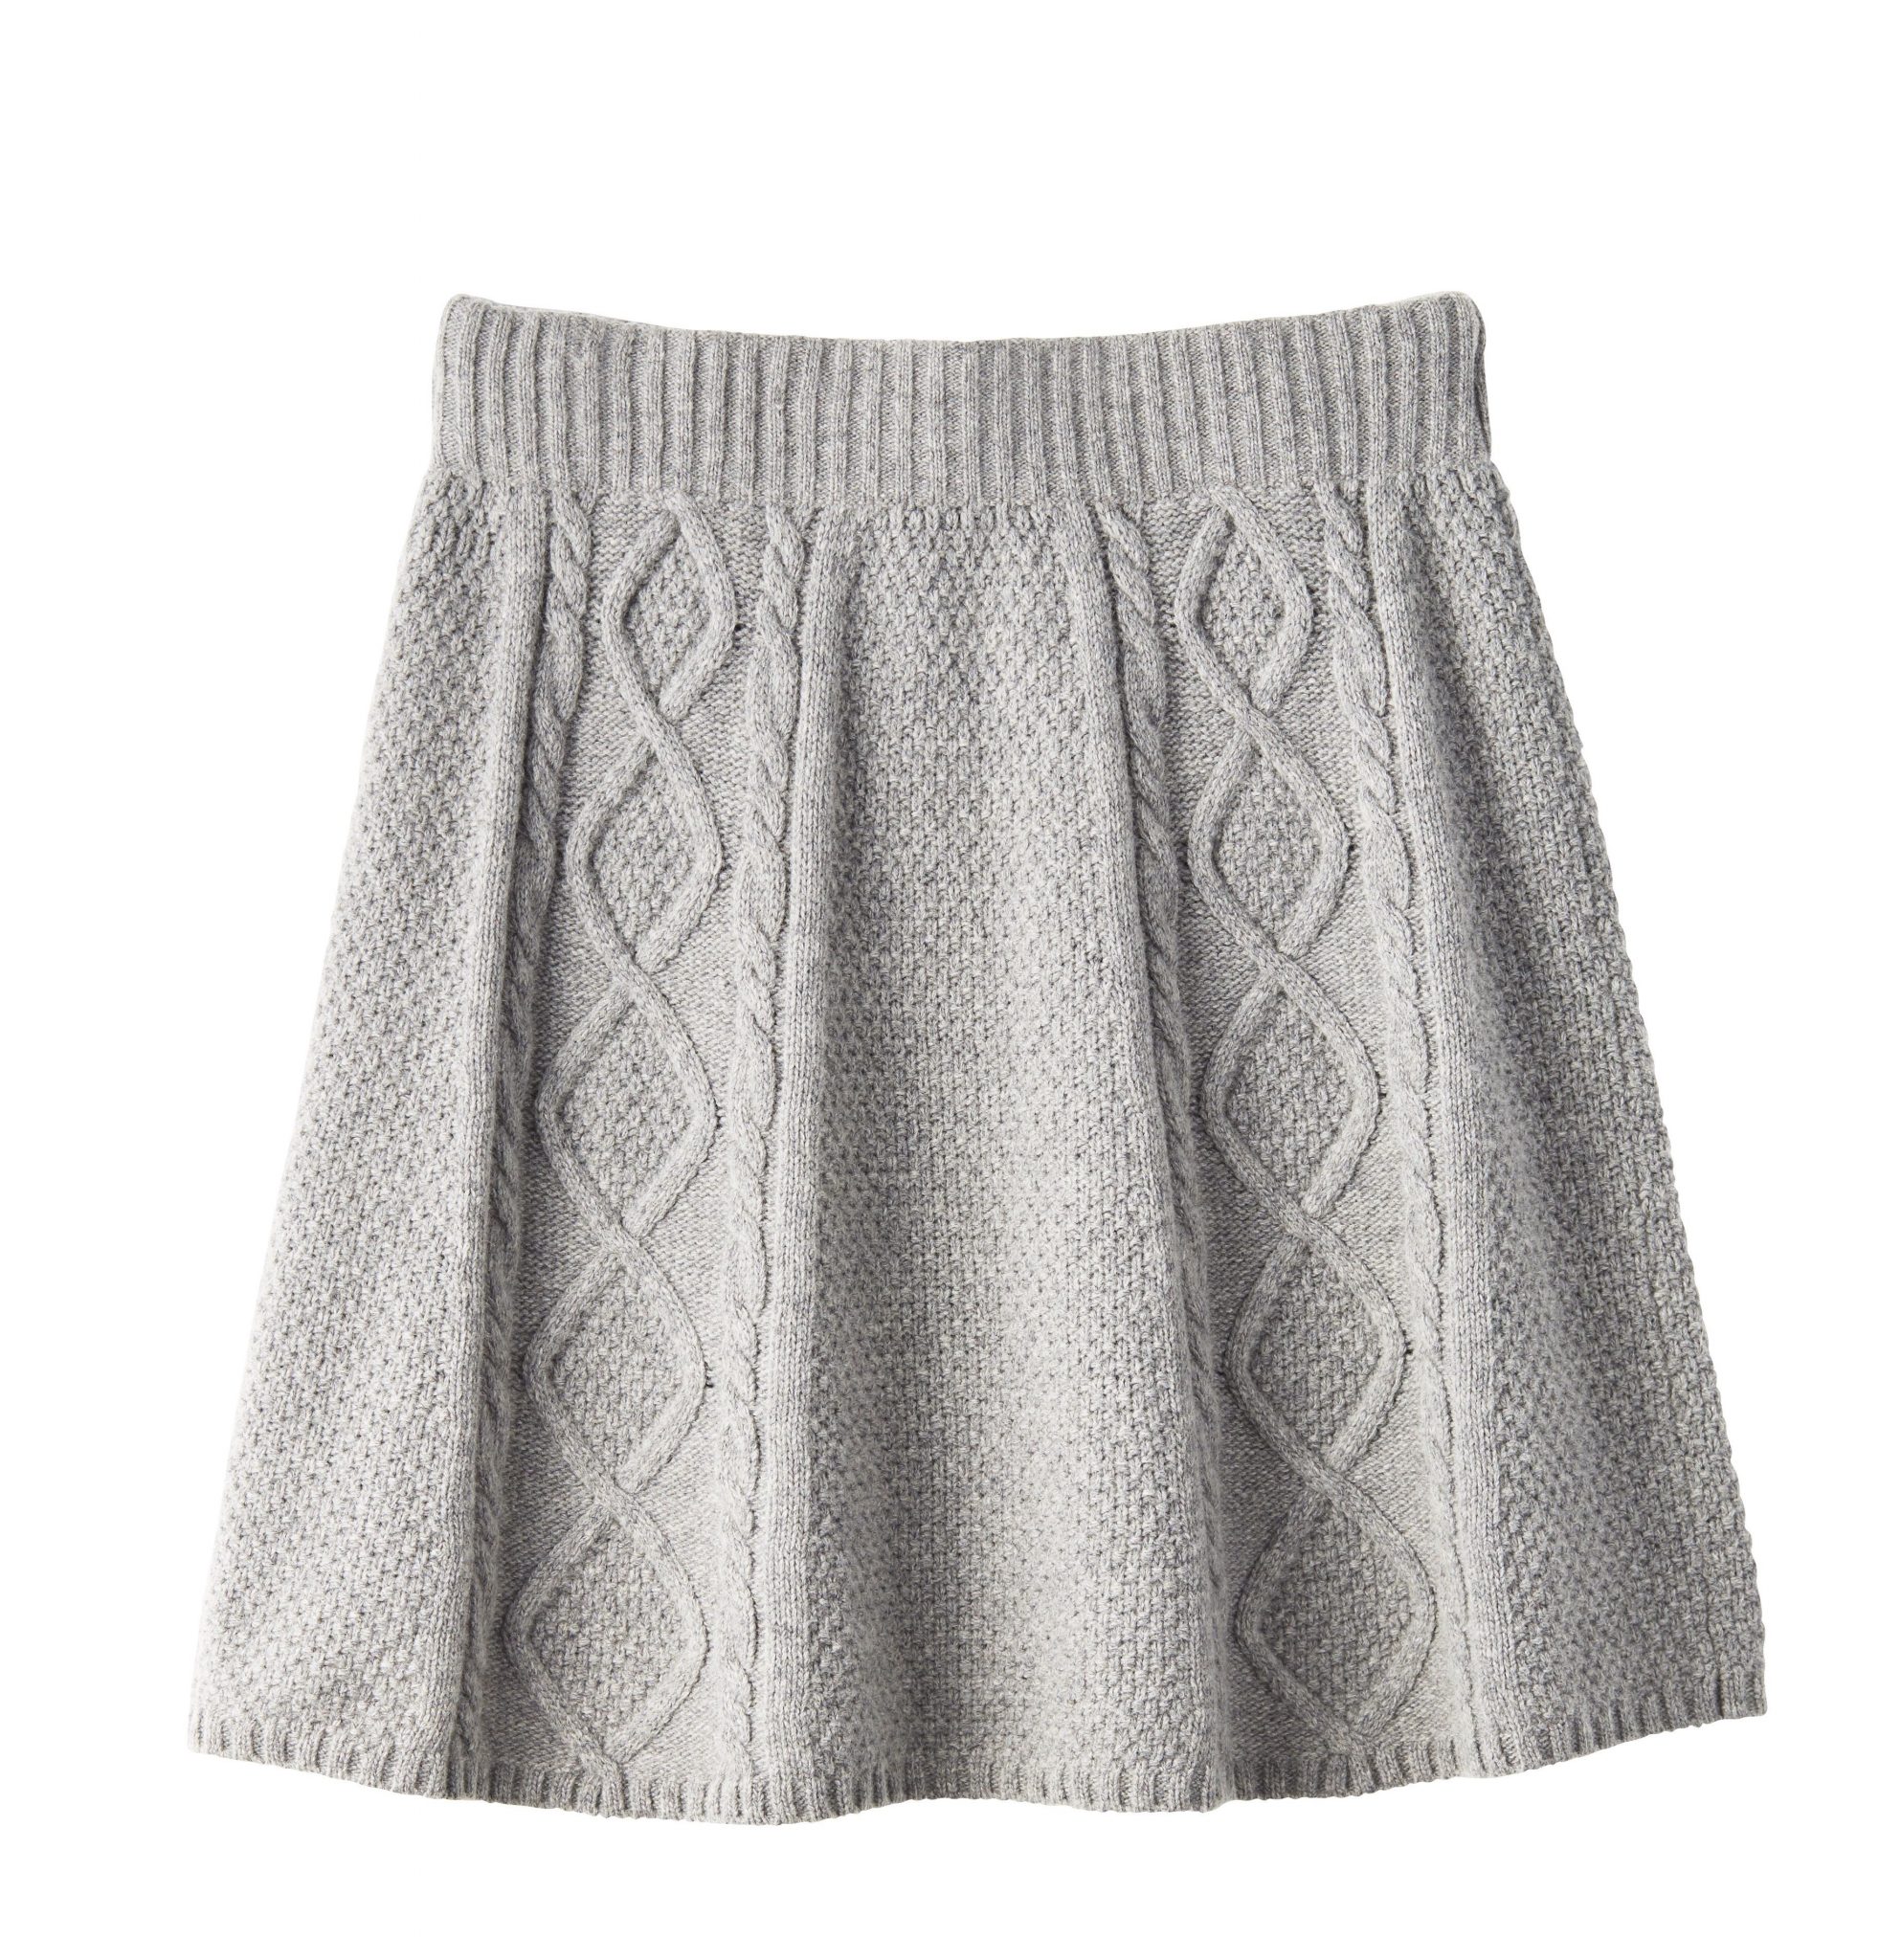 Wool Cable Knit Skirt  $29.99  Compare at $45 